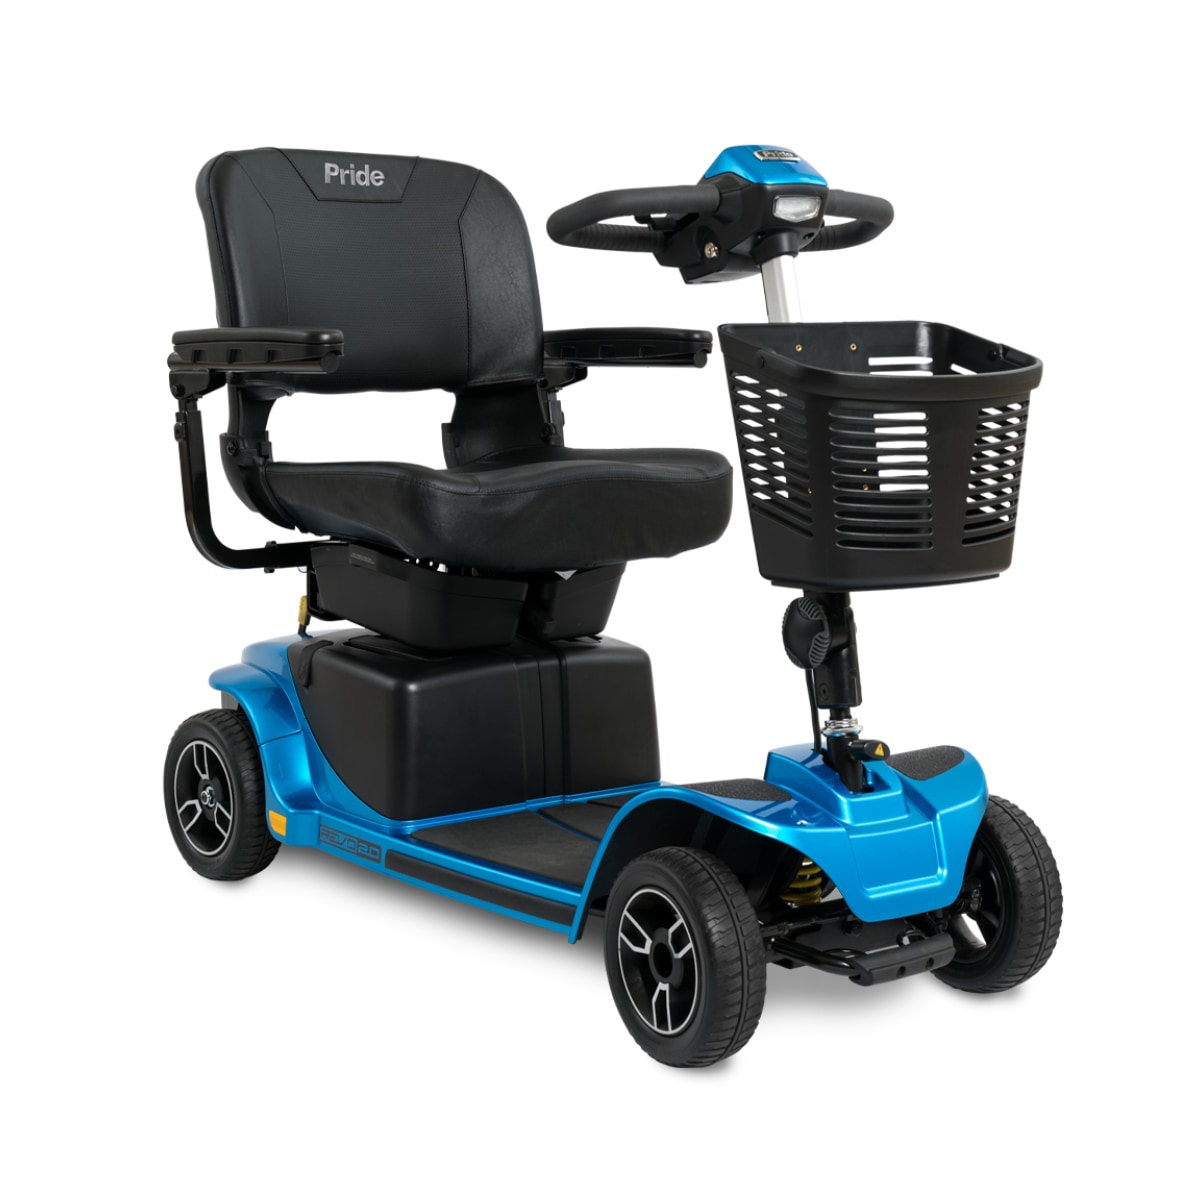 Mobility scooter with simple chair, blue highlights, and a basket